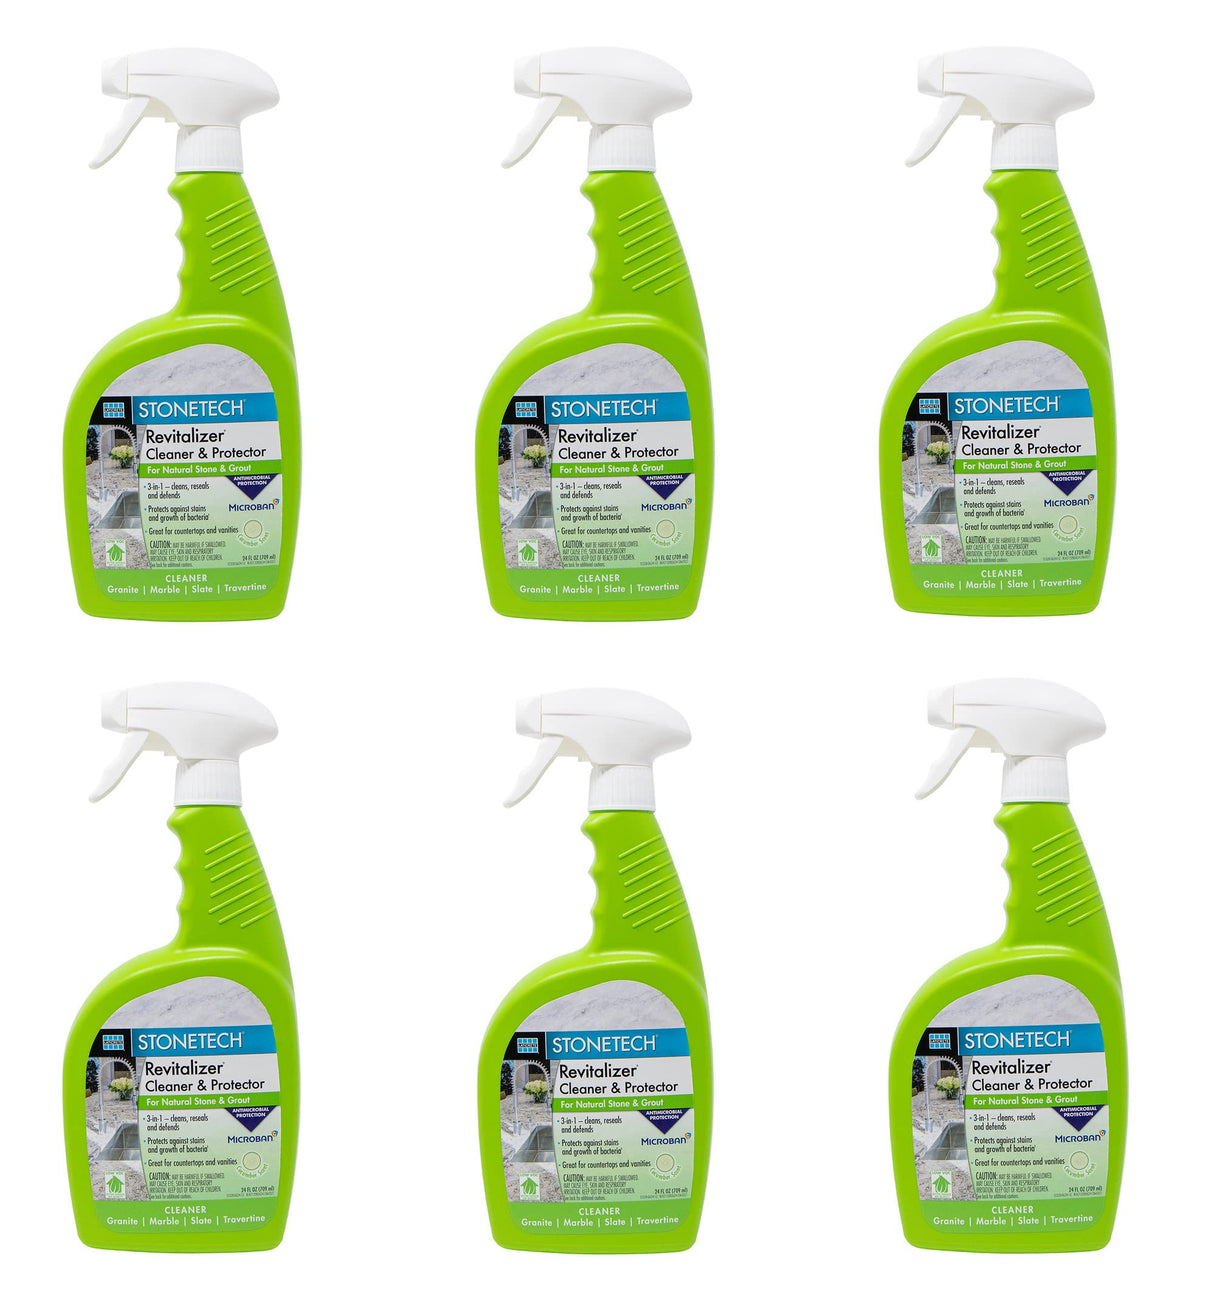 StoneTech Revitalizer Ready to Use Countertop Cleaner and Protector Spray 24Oz. Cucumber Scent (Pack of 6)